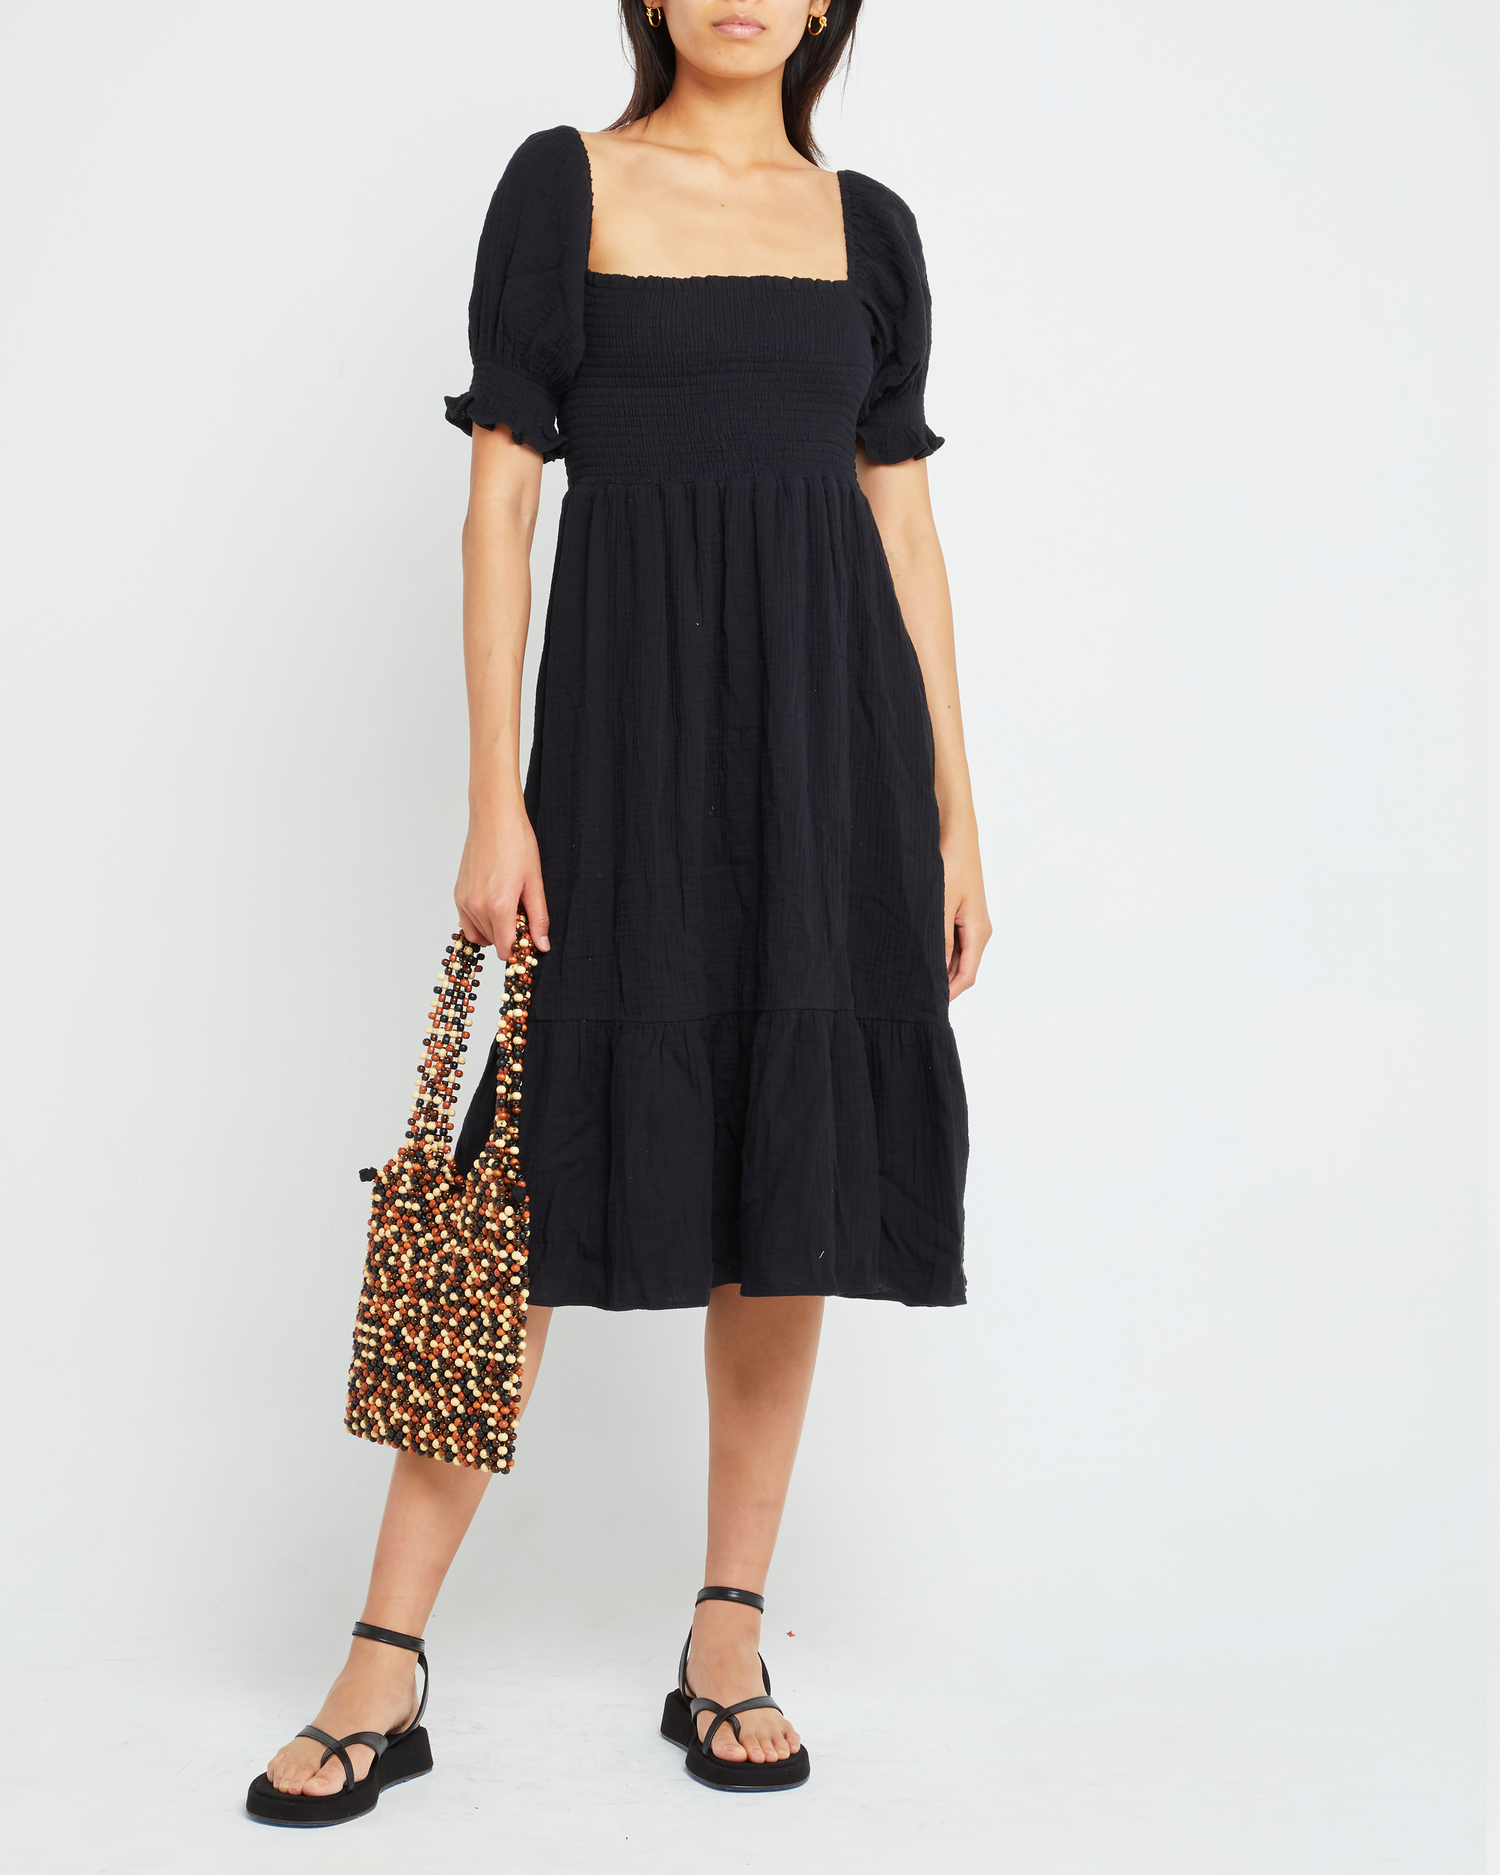 First image of Angie Dress, a black midi dress, puff sleeves, smocked bodice, square neckline